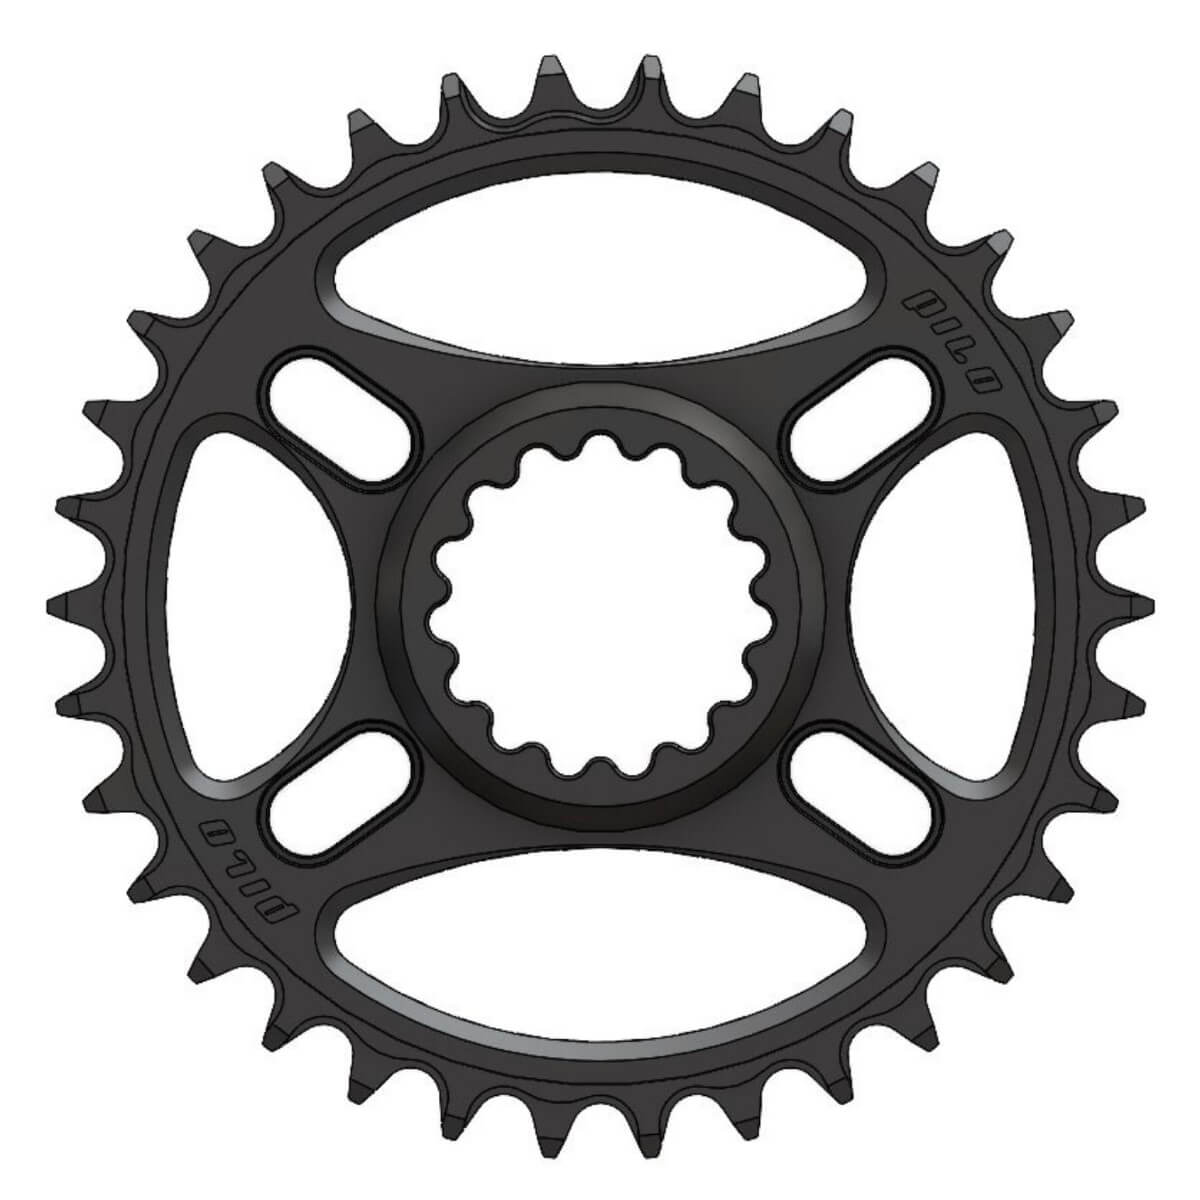 Pilo C74 e*thirteen direct Chainring Narrow Wide 34T Hyperglide+ Compatible